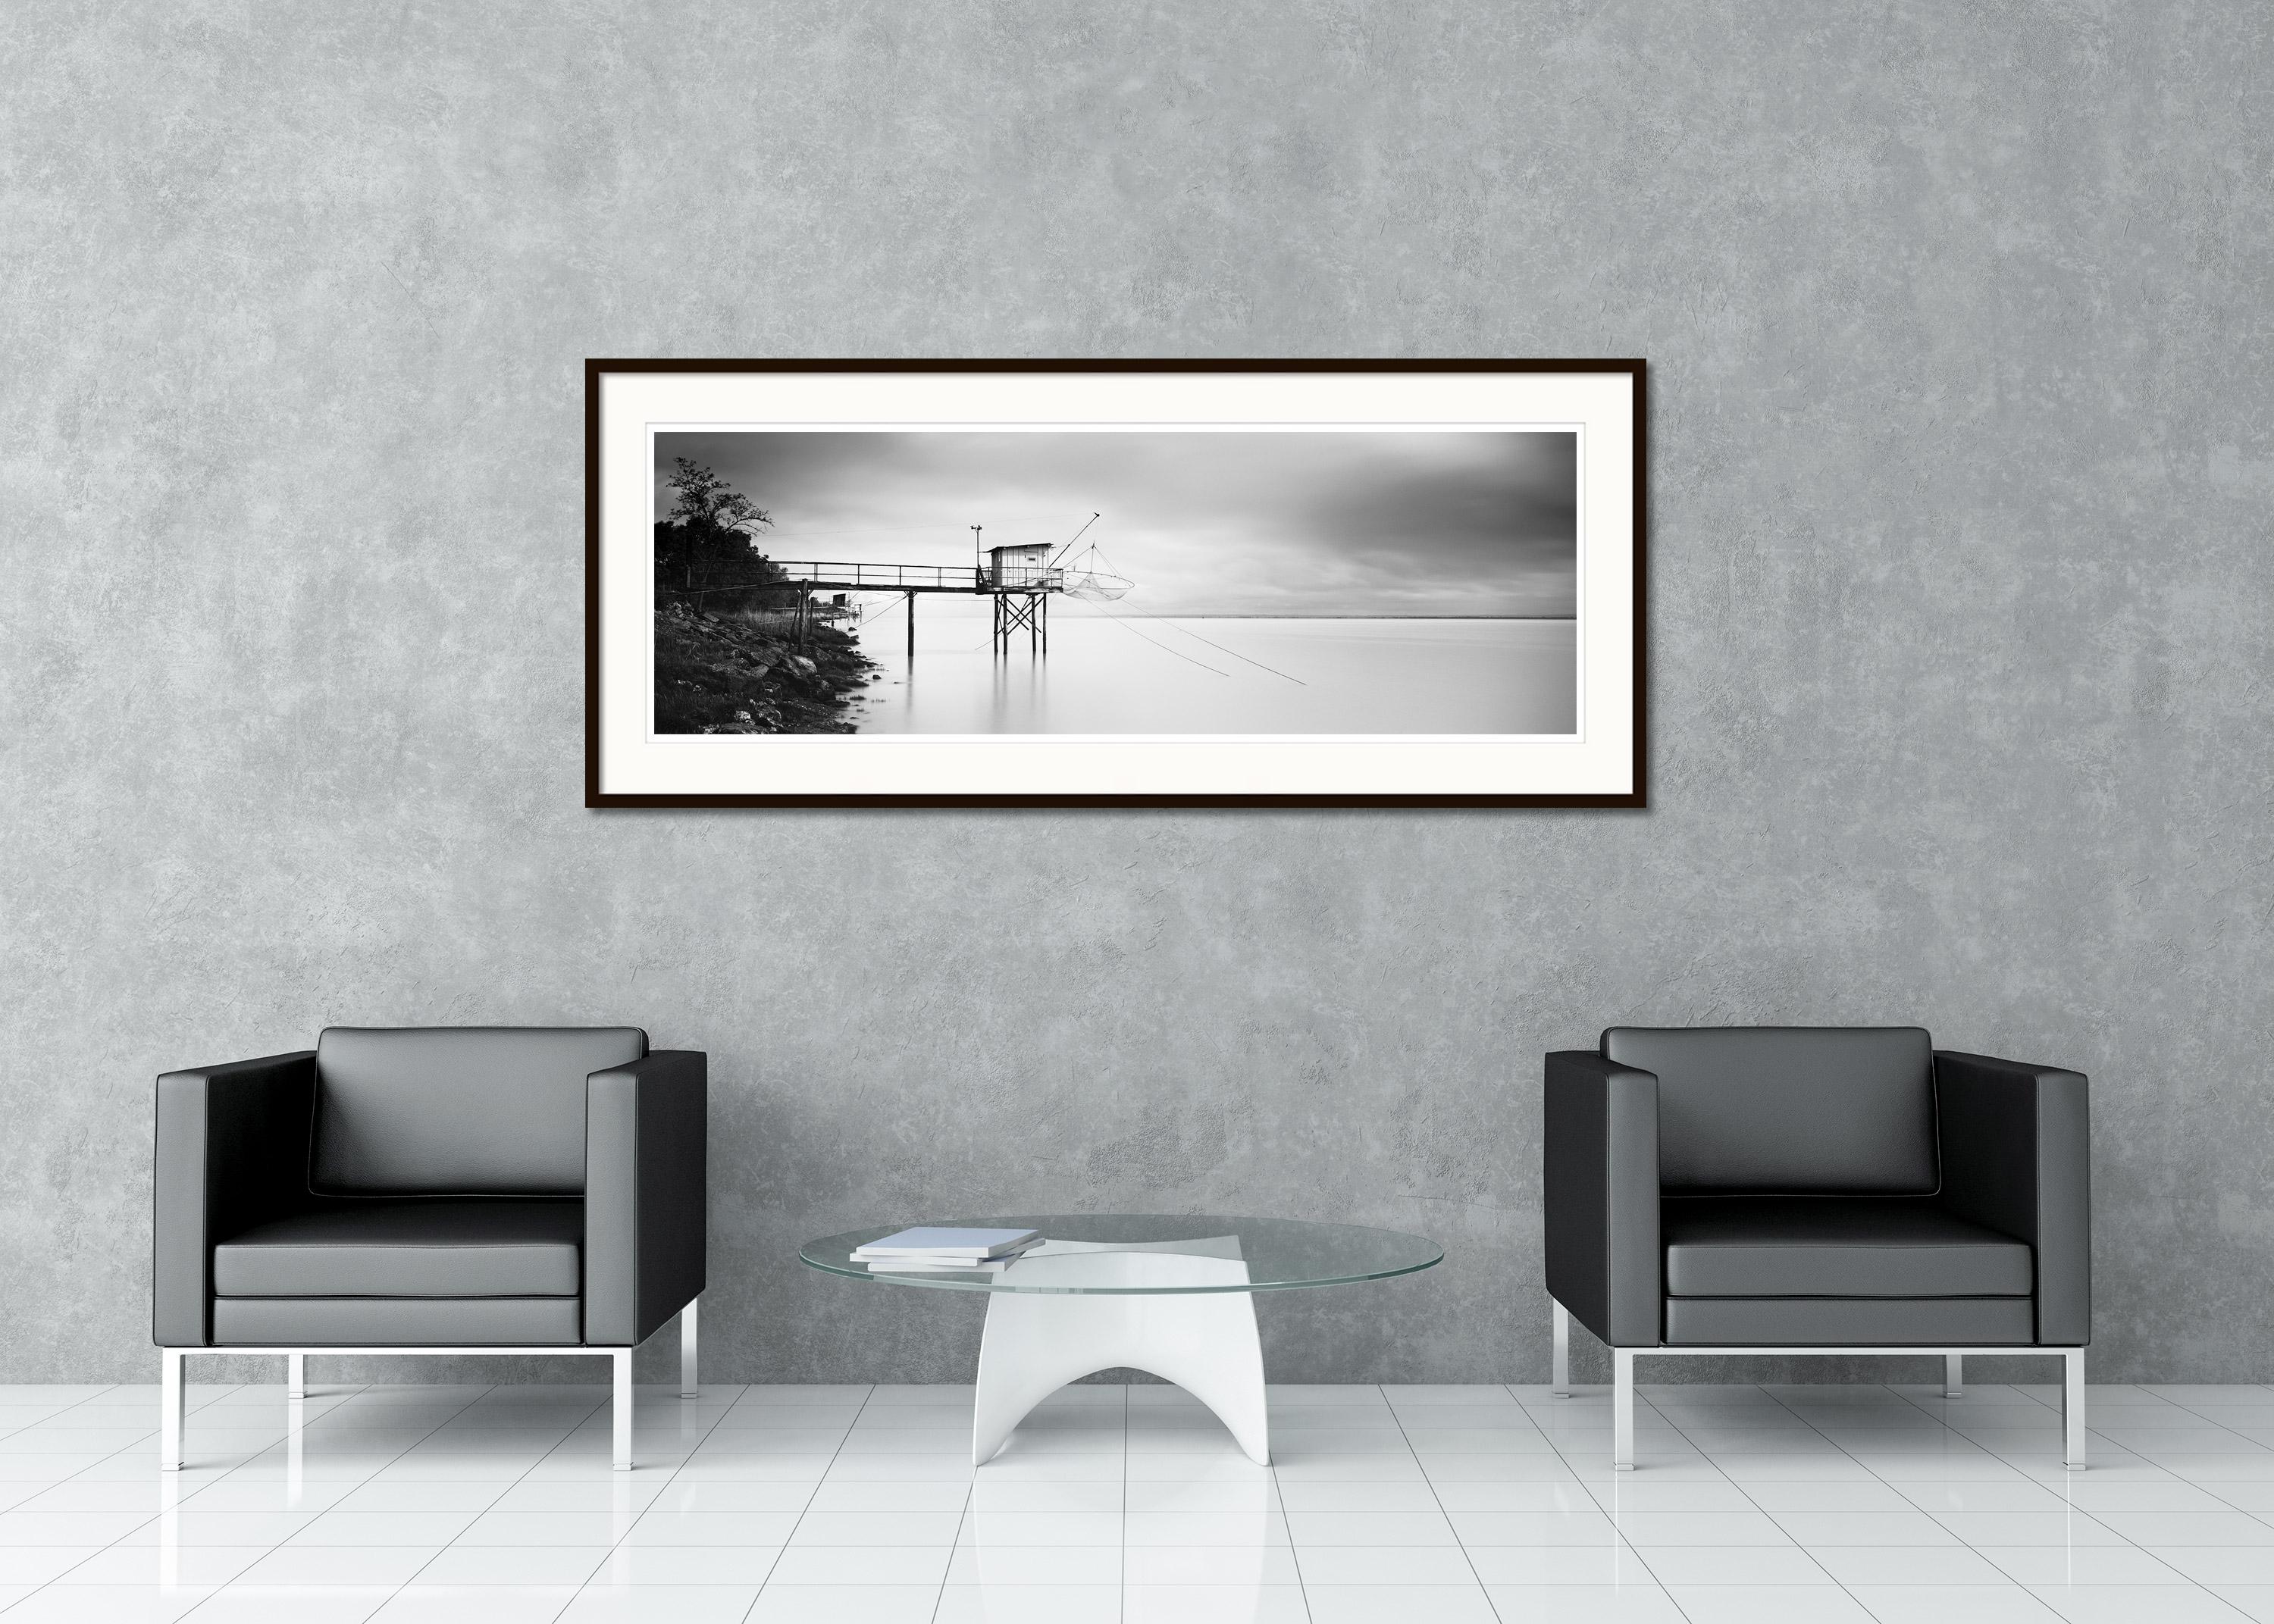 Gerald Berghammer - Limited edition of 9.
Archival fine art pigment print. Signed, titled, dated and numbered by artist. Certificate of authenticity included. Printed with 4cm white border.
15.75 x 47.24 in. (40 x 120 cm) edition of 9
19.69 x 59.06